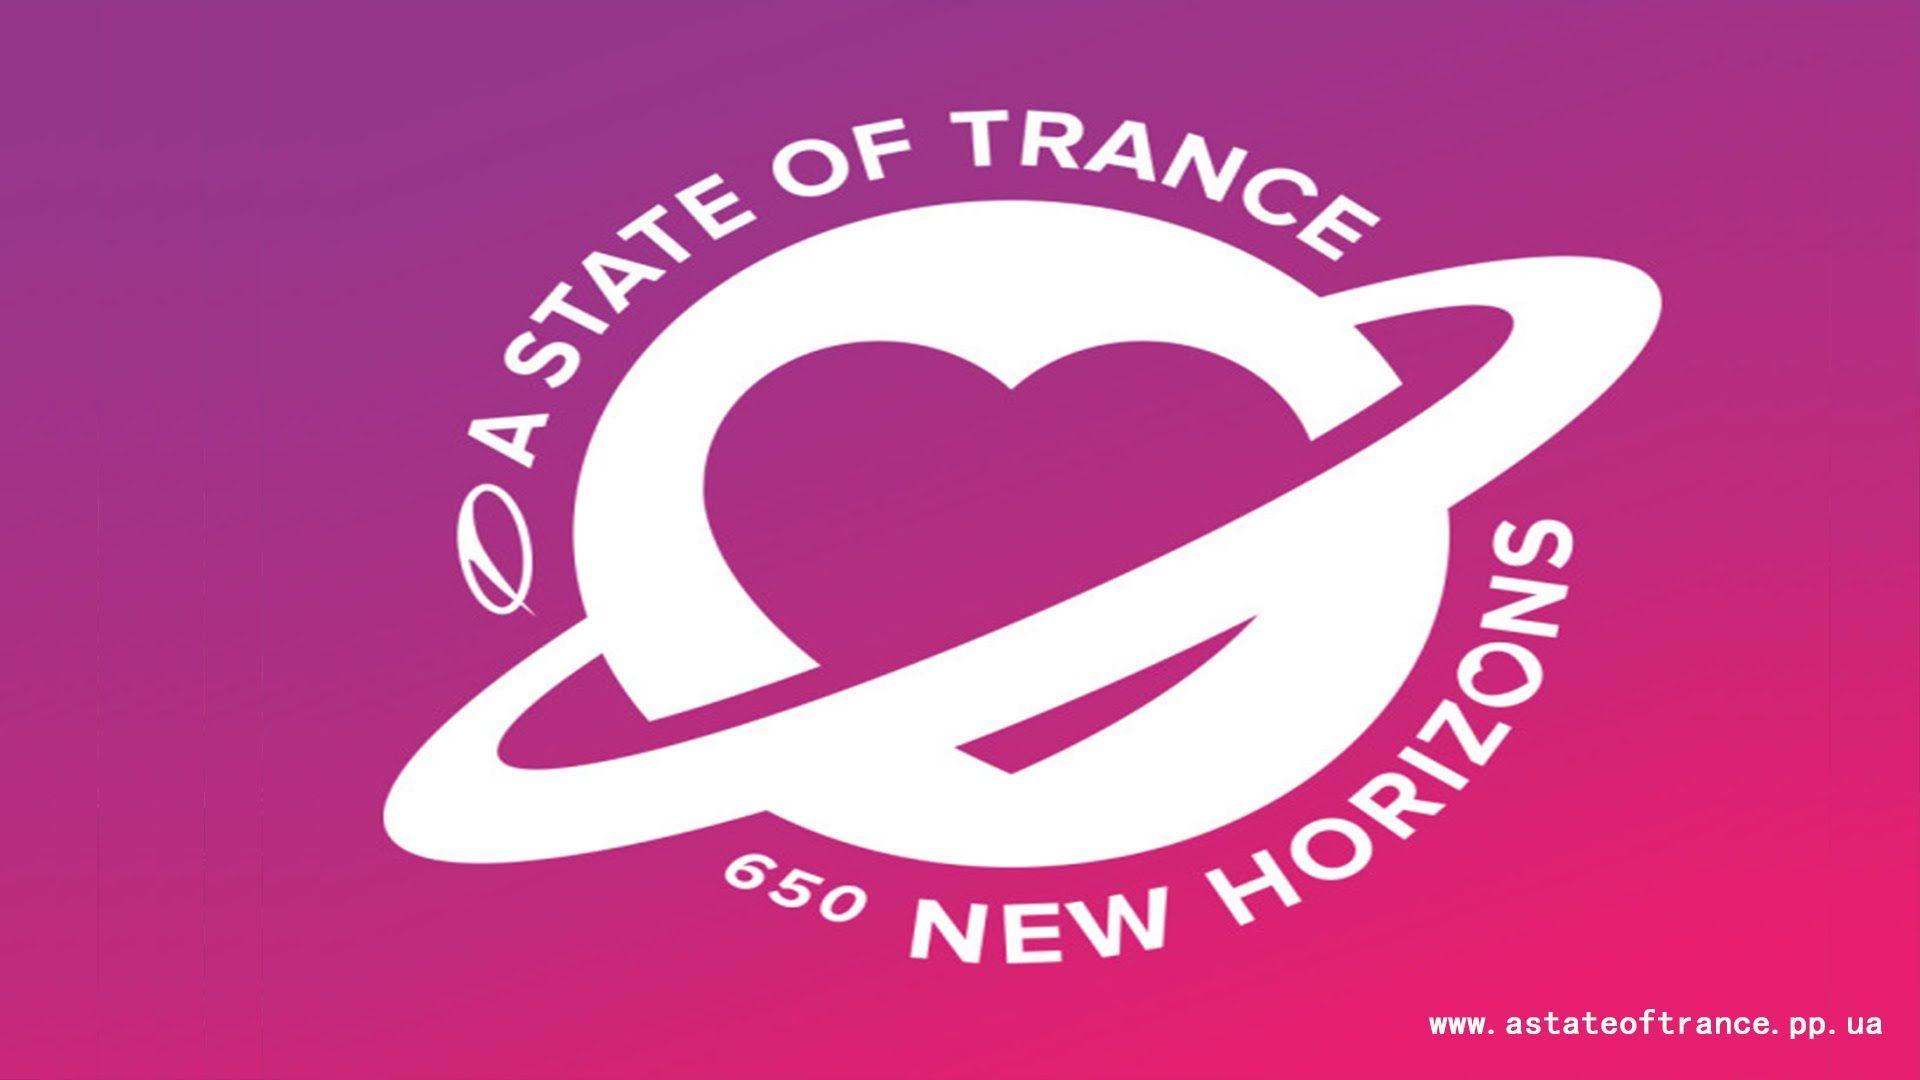 Wallpaper For > A State Of Trance 650 Wallpaper